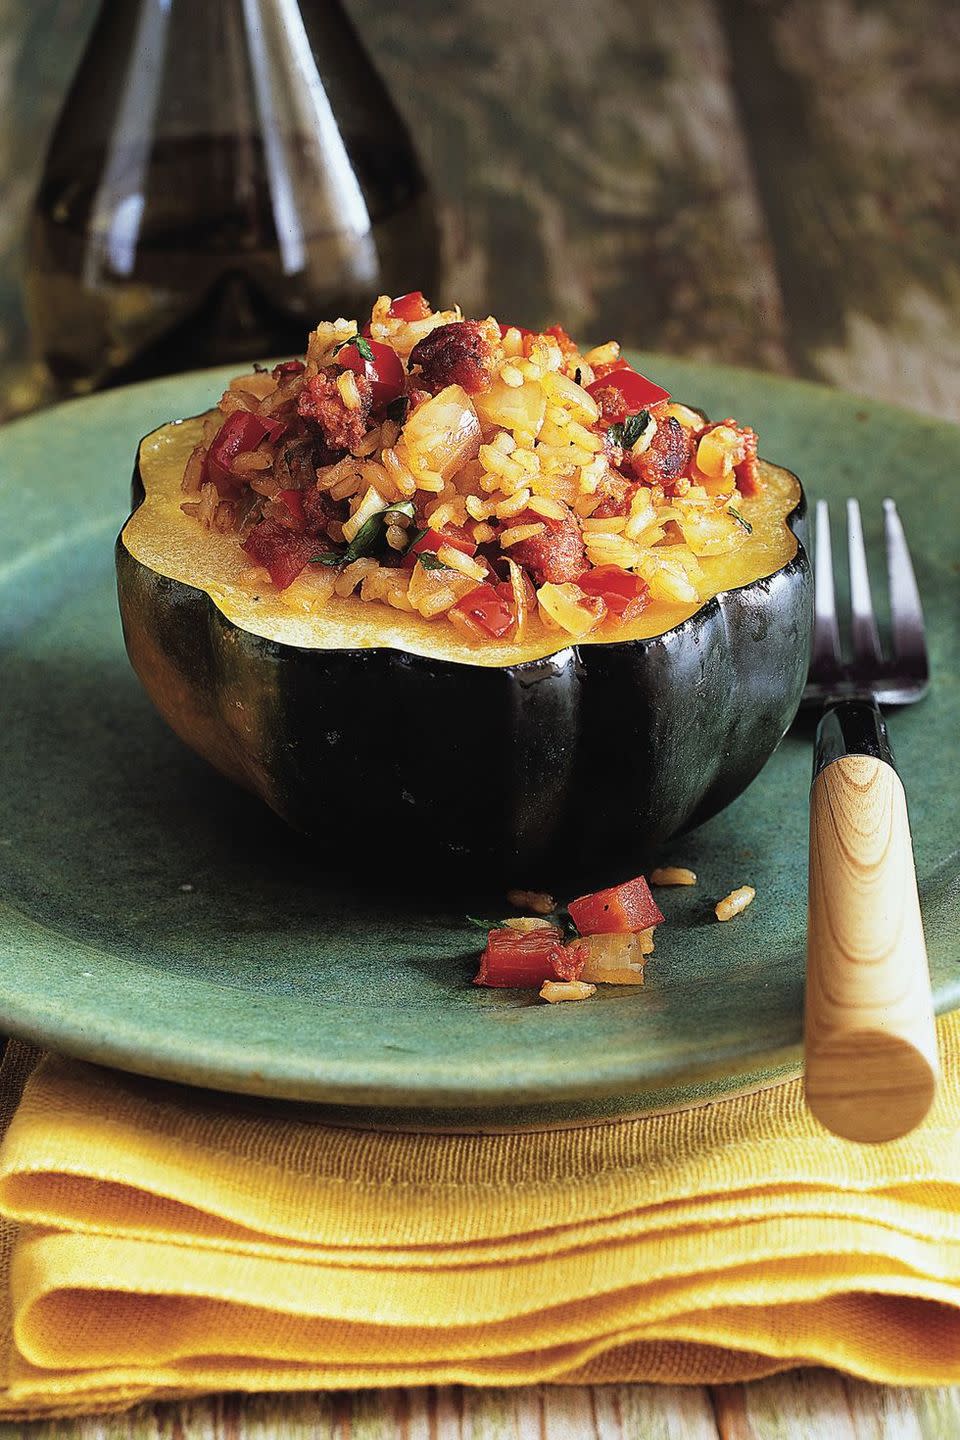 Acorn Squash With Brown Rice and Turkey Sausage